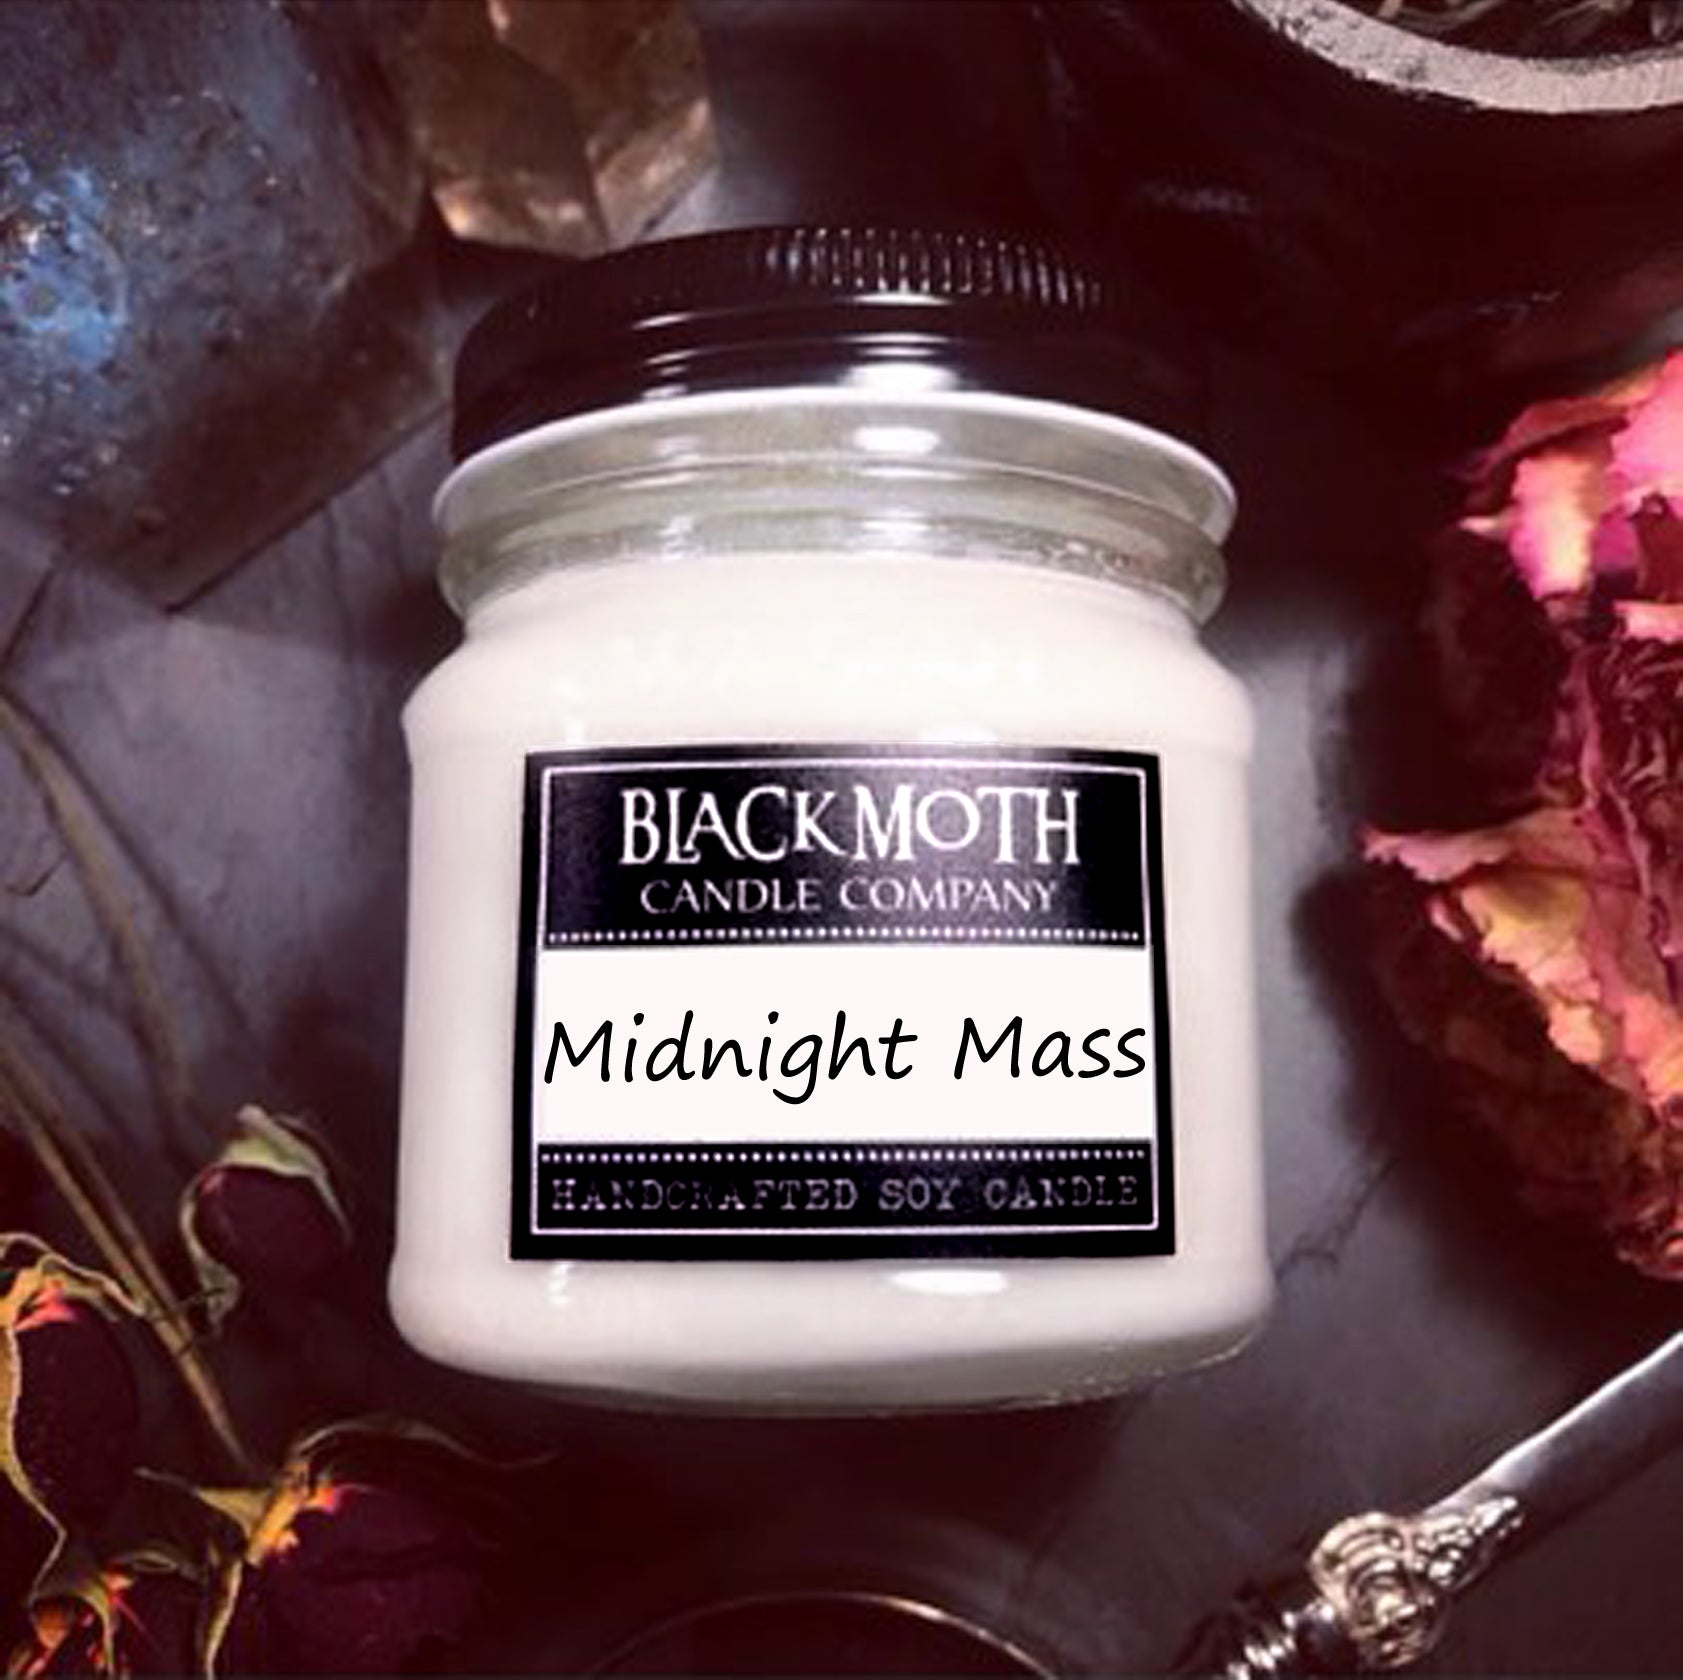 8 oz Midnight Mass Scented Soy Candle in Mason Jar